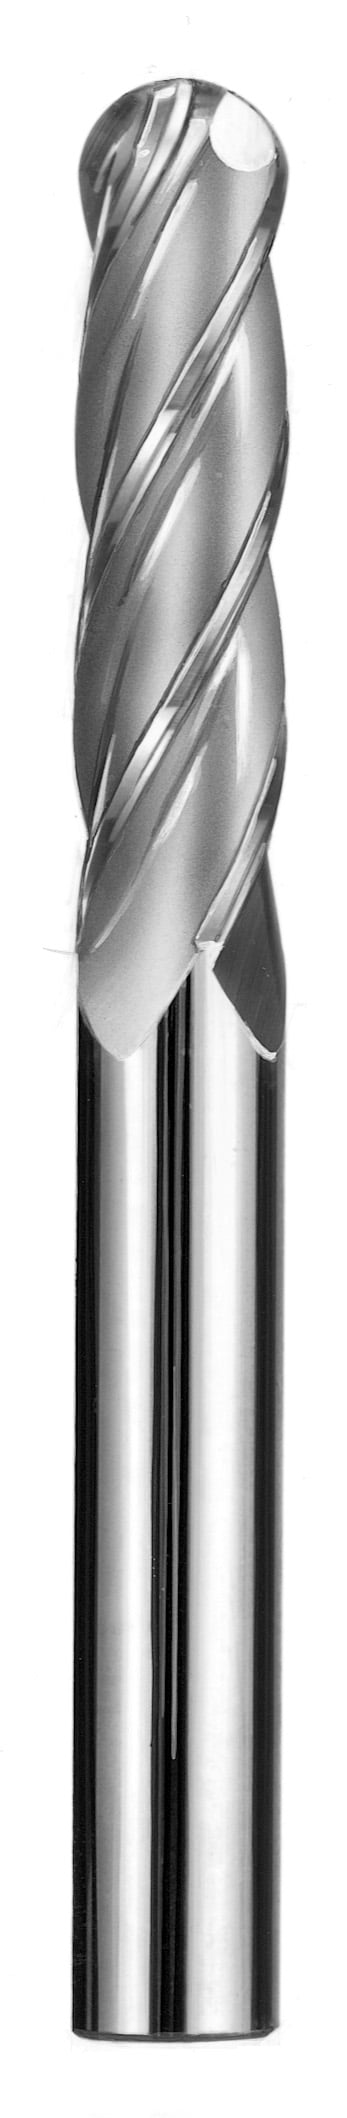 1/2" Dia, 4 Flute, Ball Nose End Mill - 33112